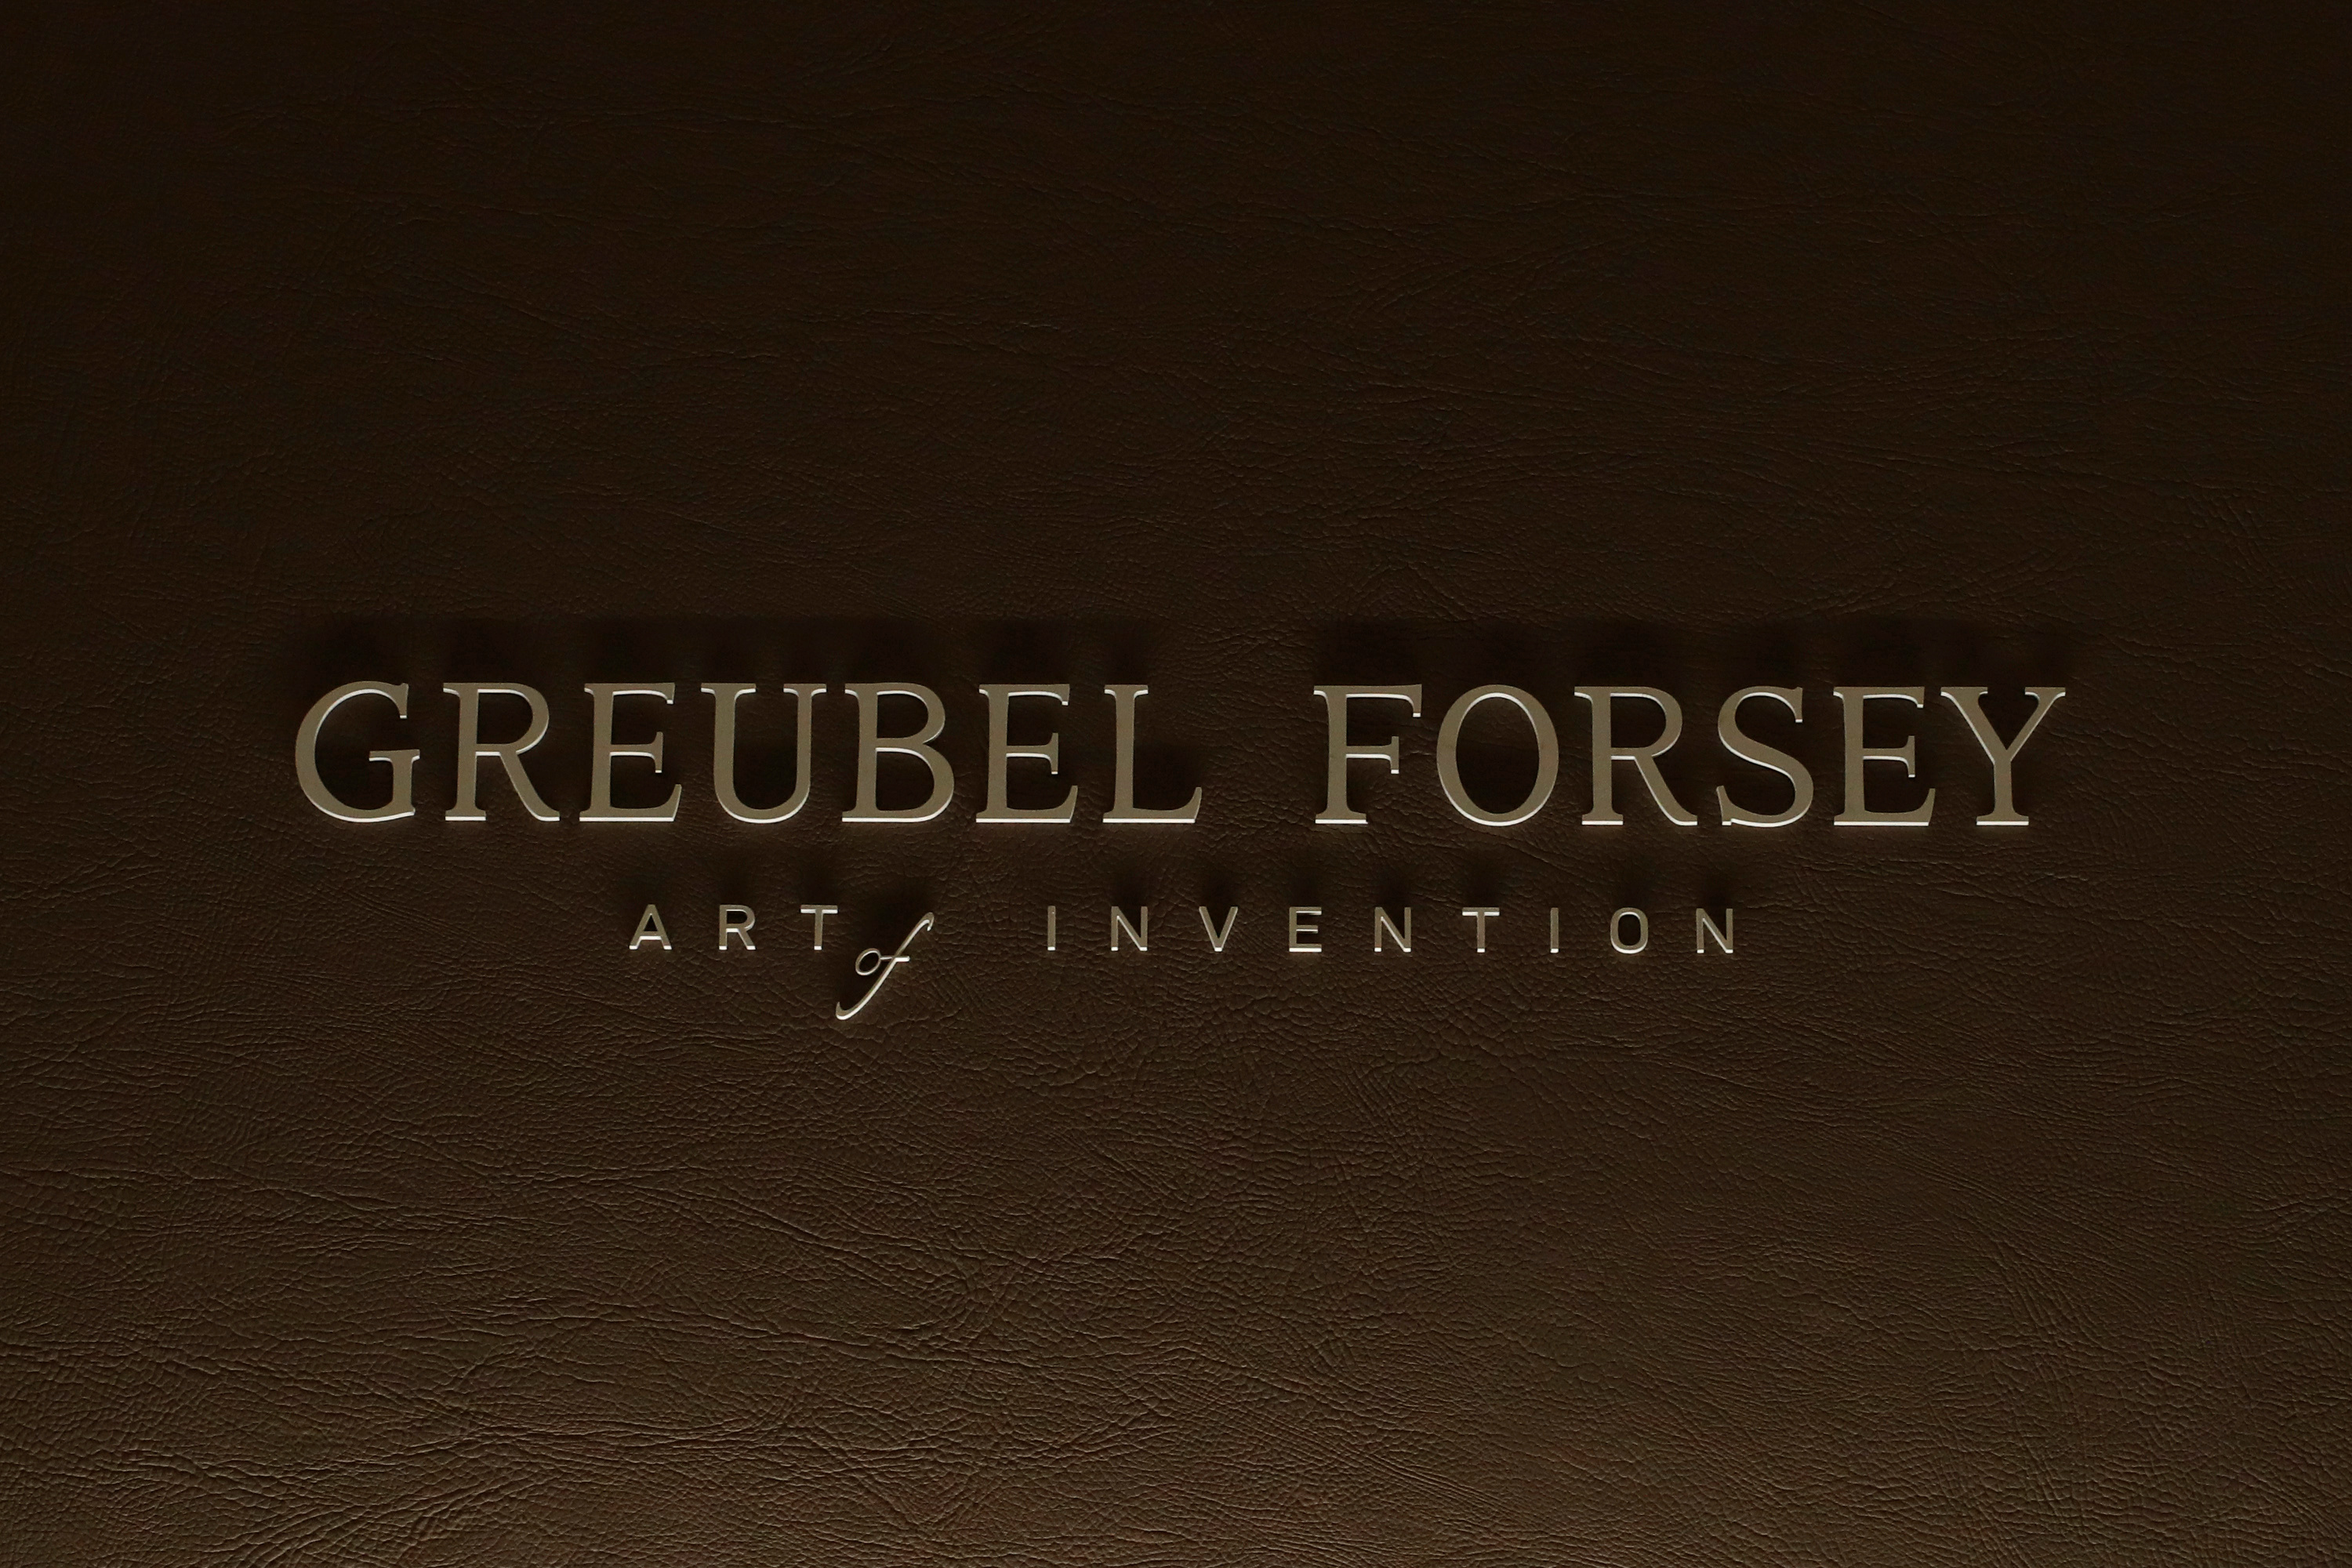 The logo of Greubel Forsey is pictured at the SIHH watch fair in Geneva